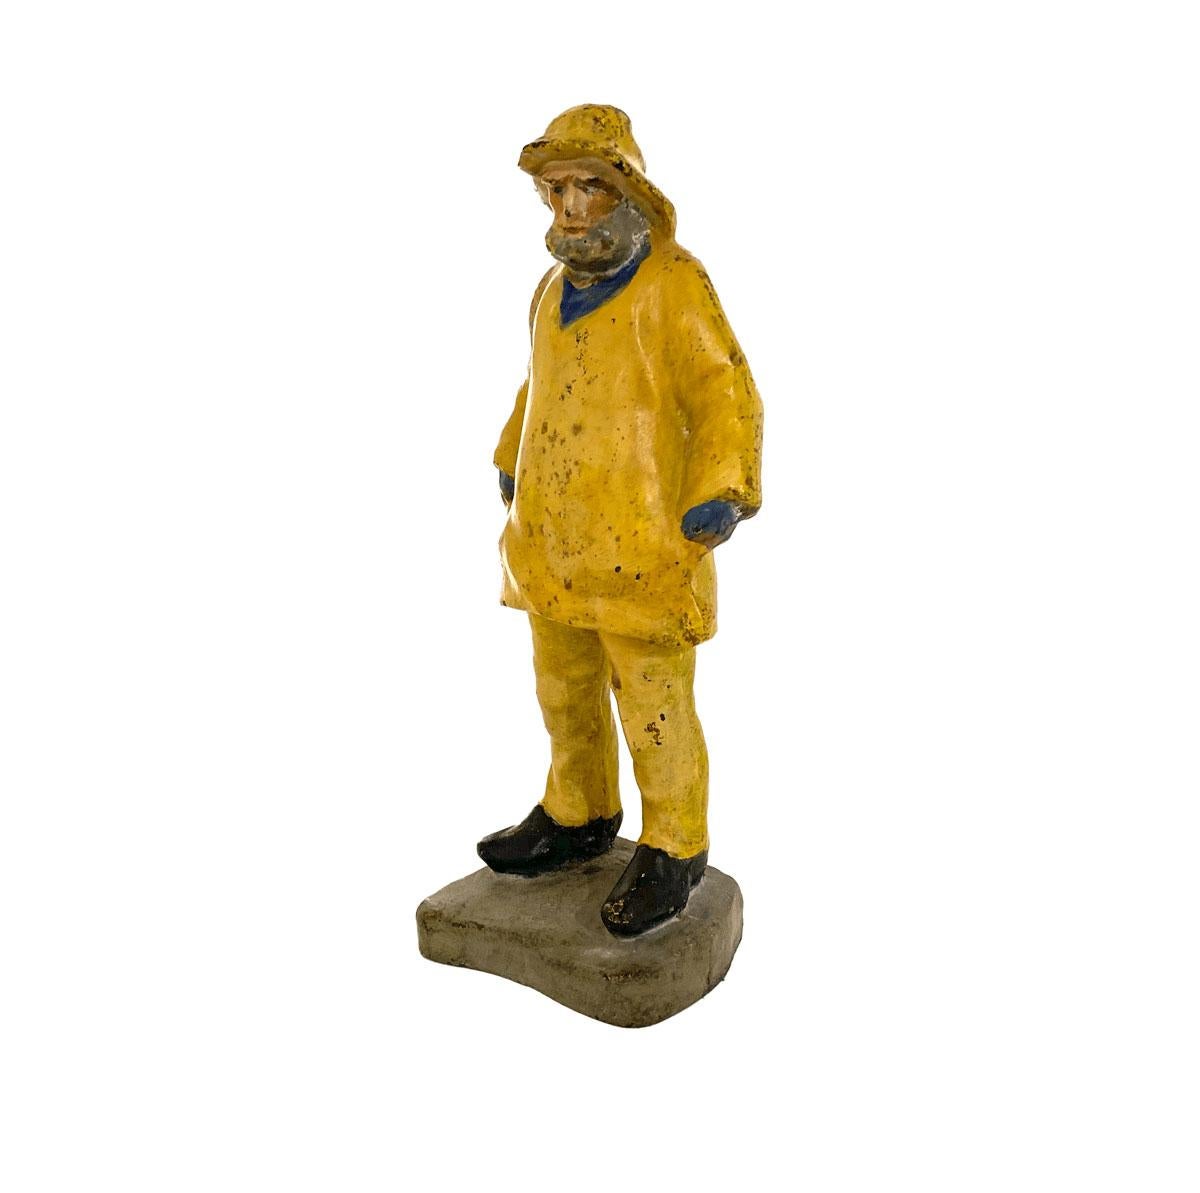 Large cast iron doorstop in the form of and old salt sailor / fisherman with a grey beard and wearing yellow foul weather gear. Manufactured by the Eastern Specialty Manufacturing Company of Connecticut and marked 